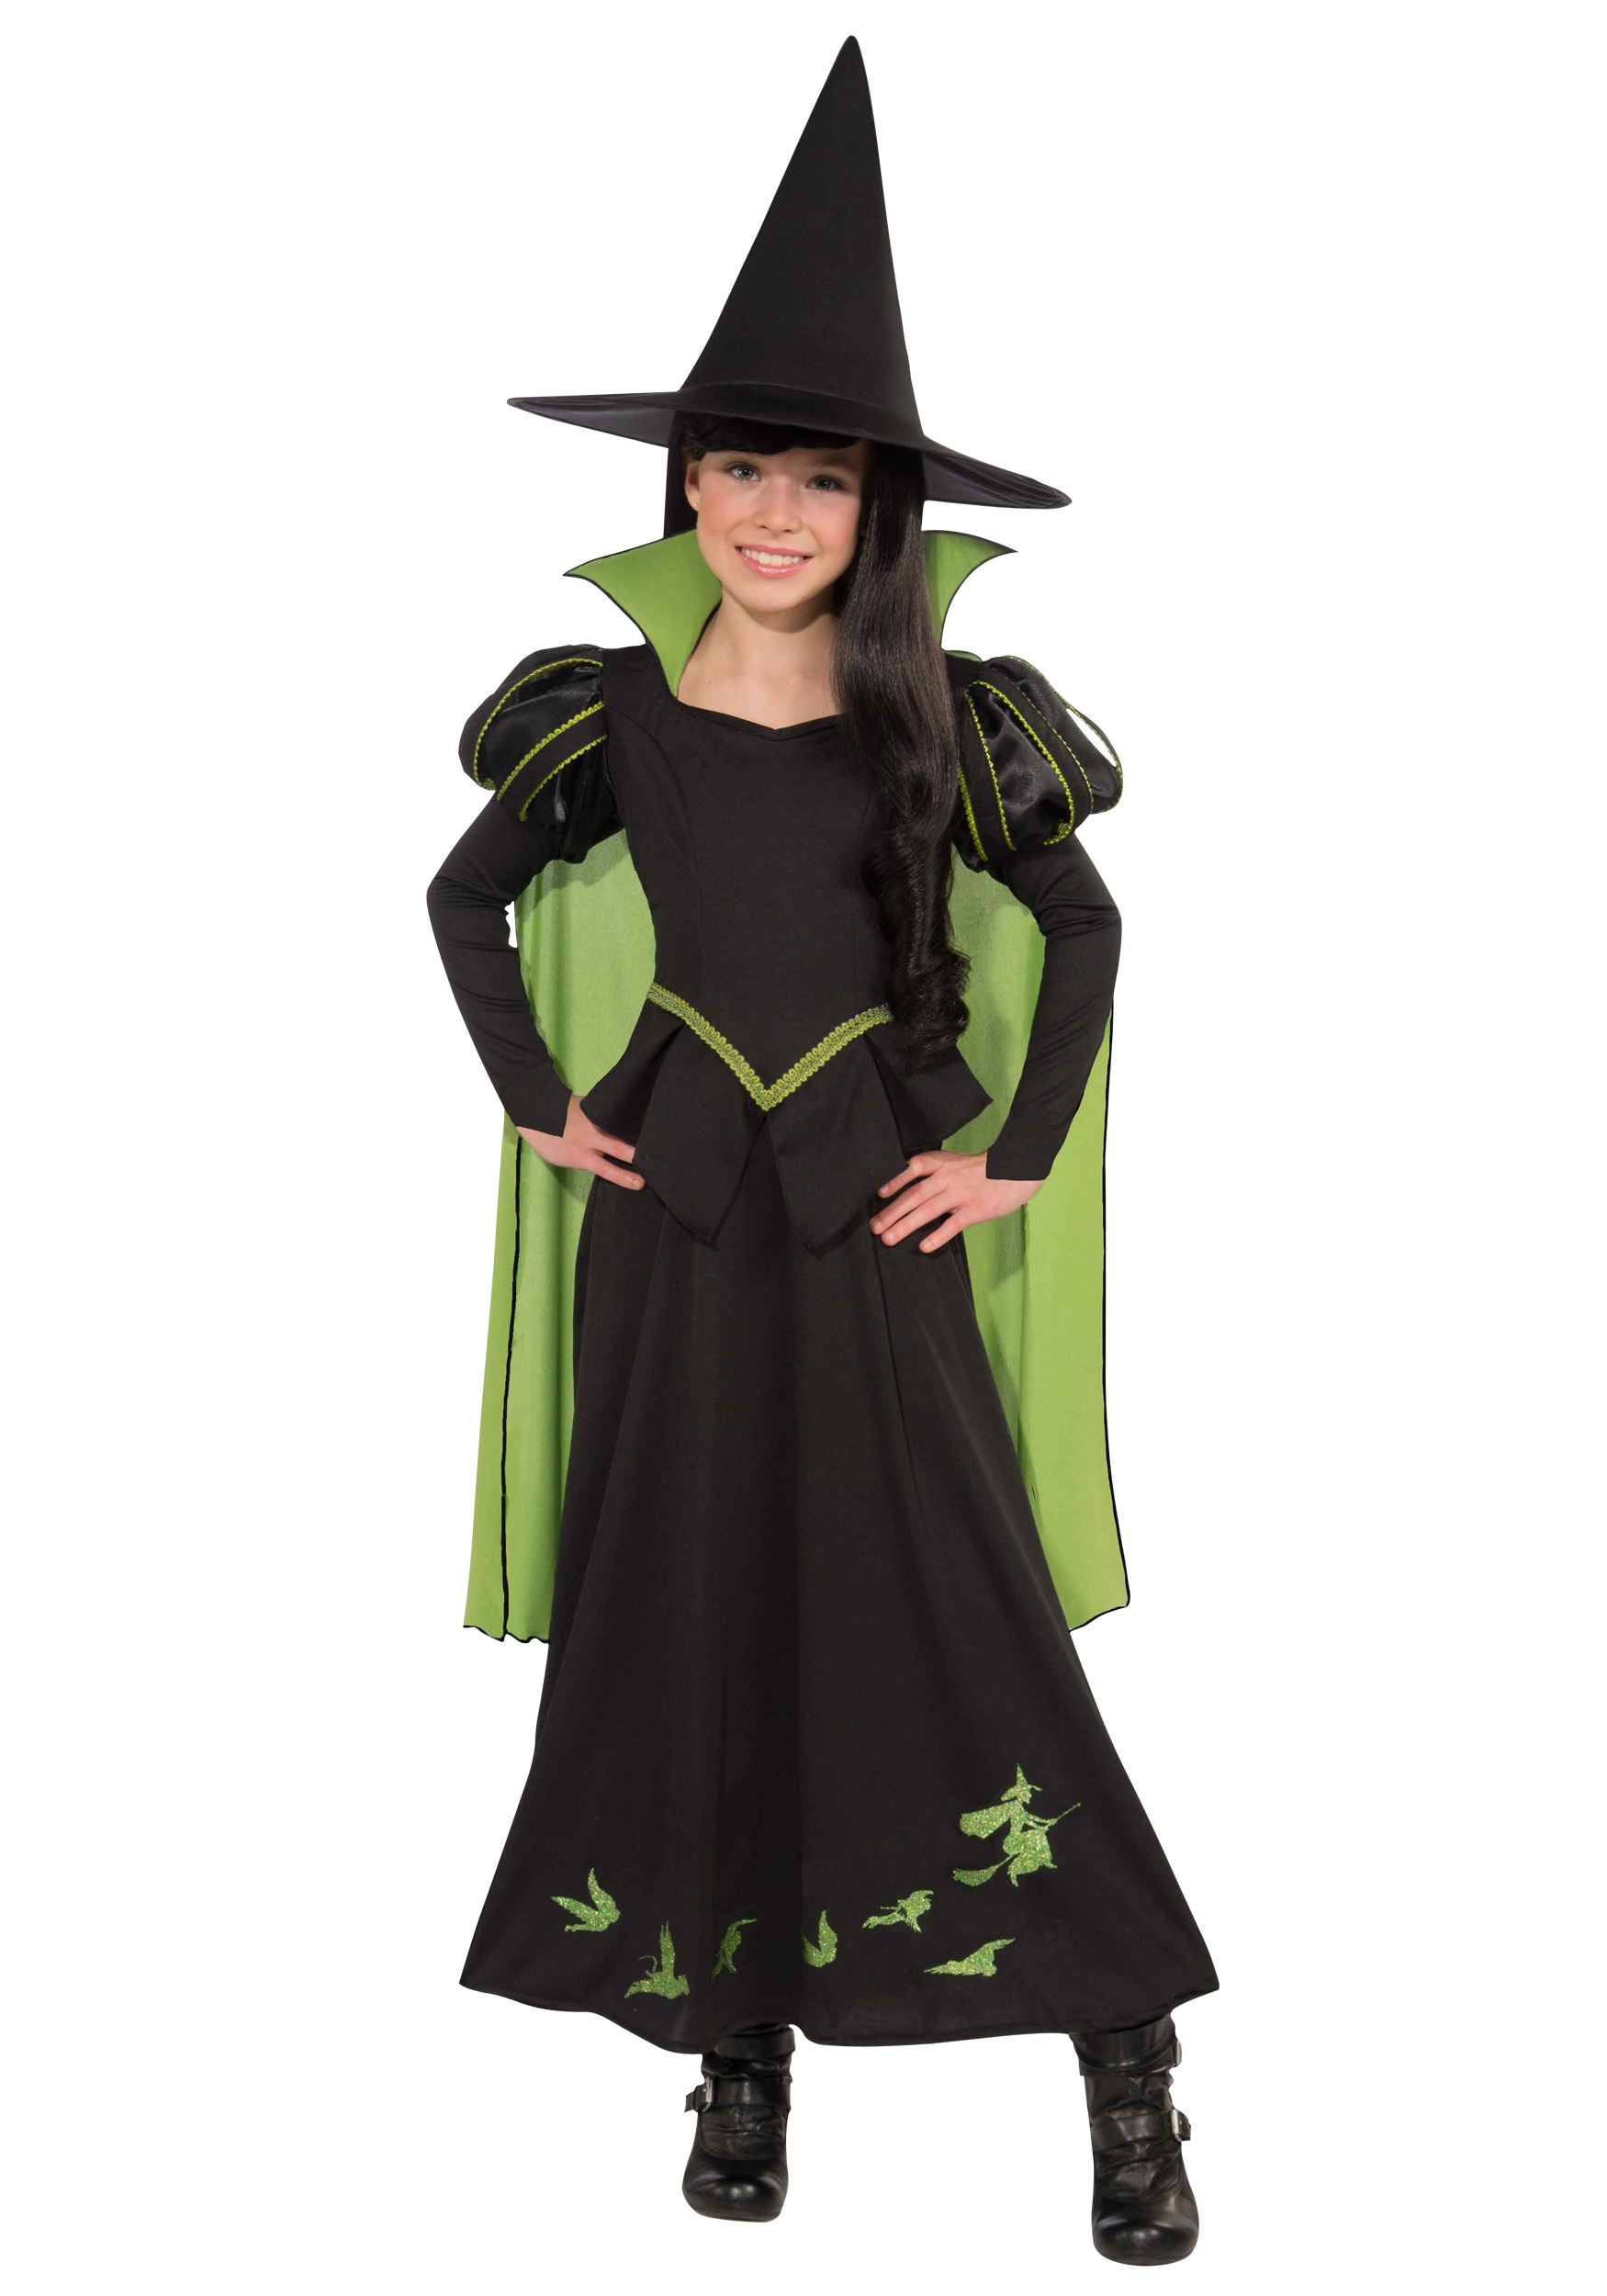 Photos - Fancy Dress Rubies Costume Co. Inc Wicked Witch of the West Child Costume Black/Gr 